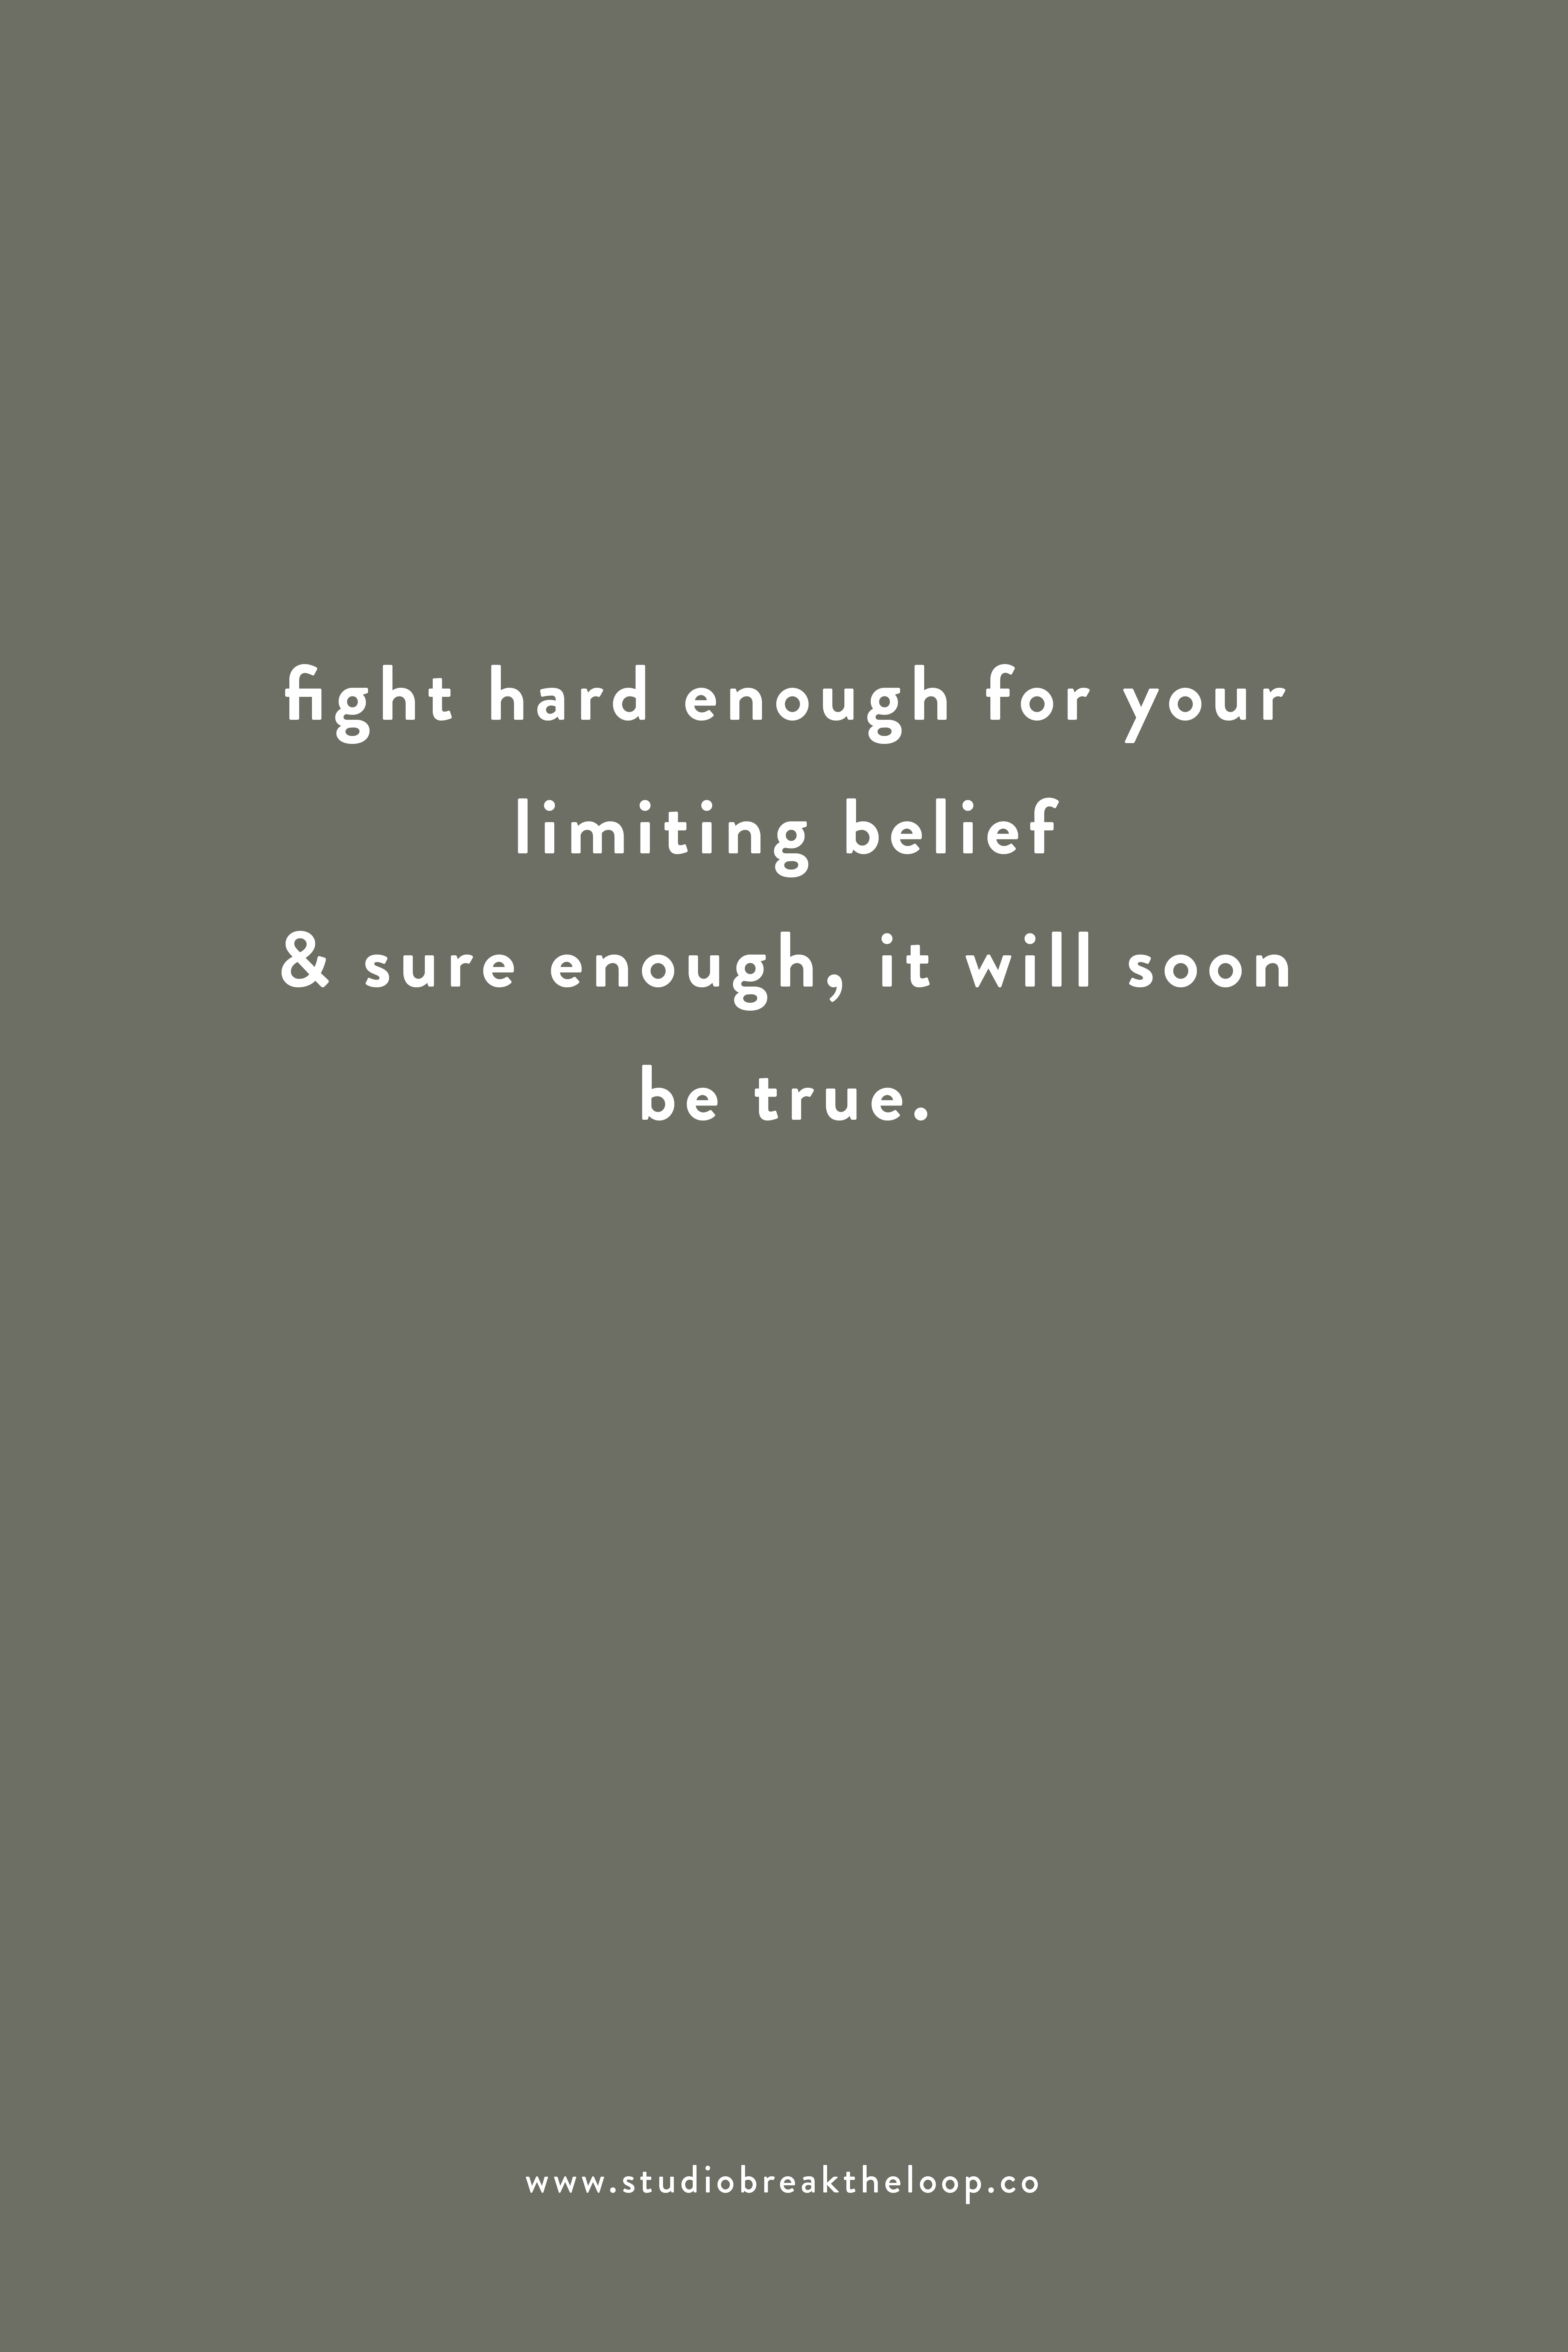 Fight hard enough for your limiting beliefs and soon enough, they'll be yours